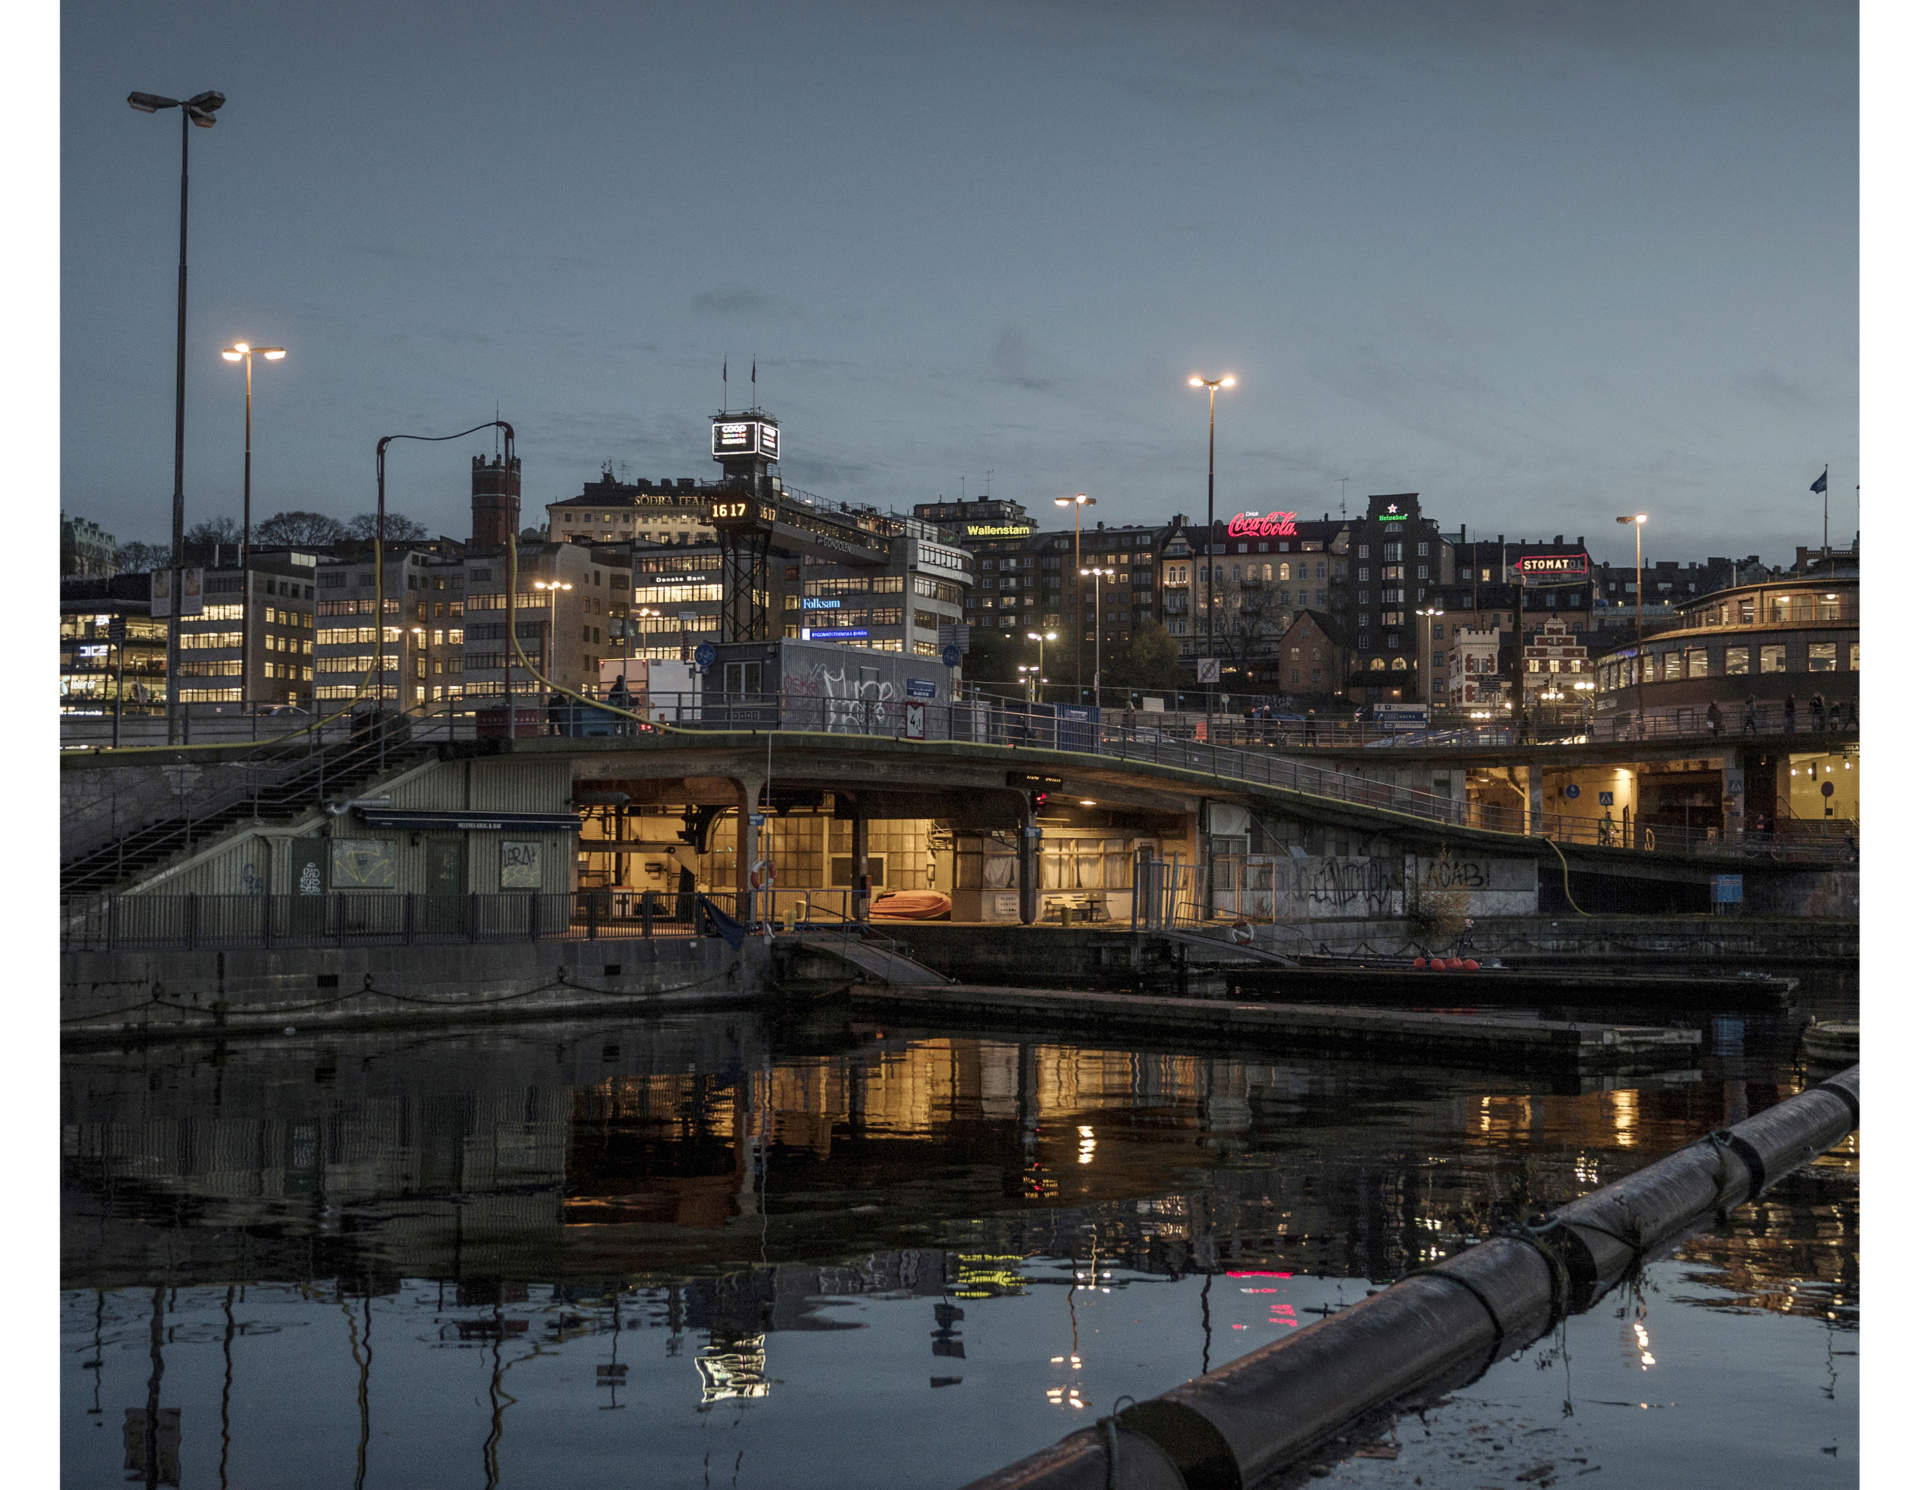 "Slussen" in central Stockholm. Pekka and Matte spends many nights sleeping under the bridge. For a period they called it their home, before they were forced to leave because of heavy construction in the area